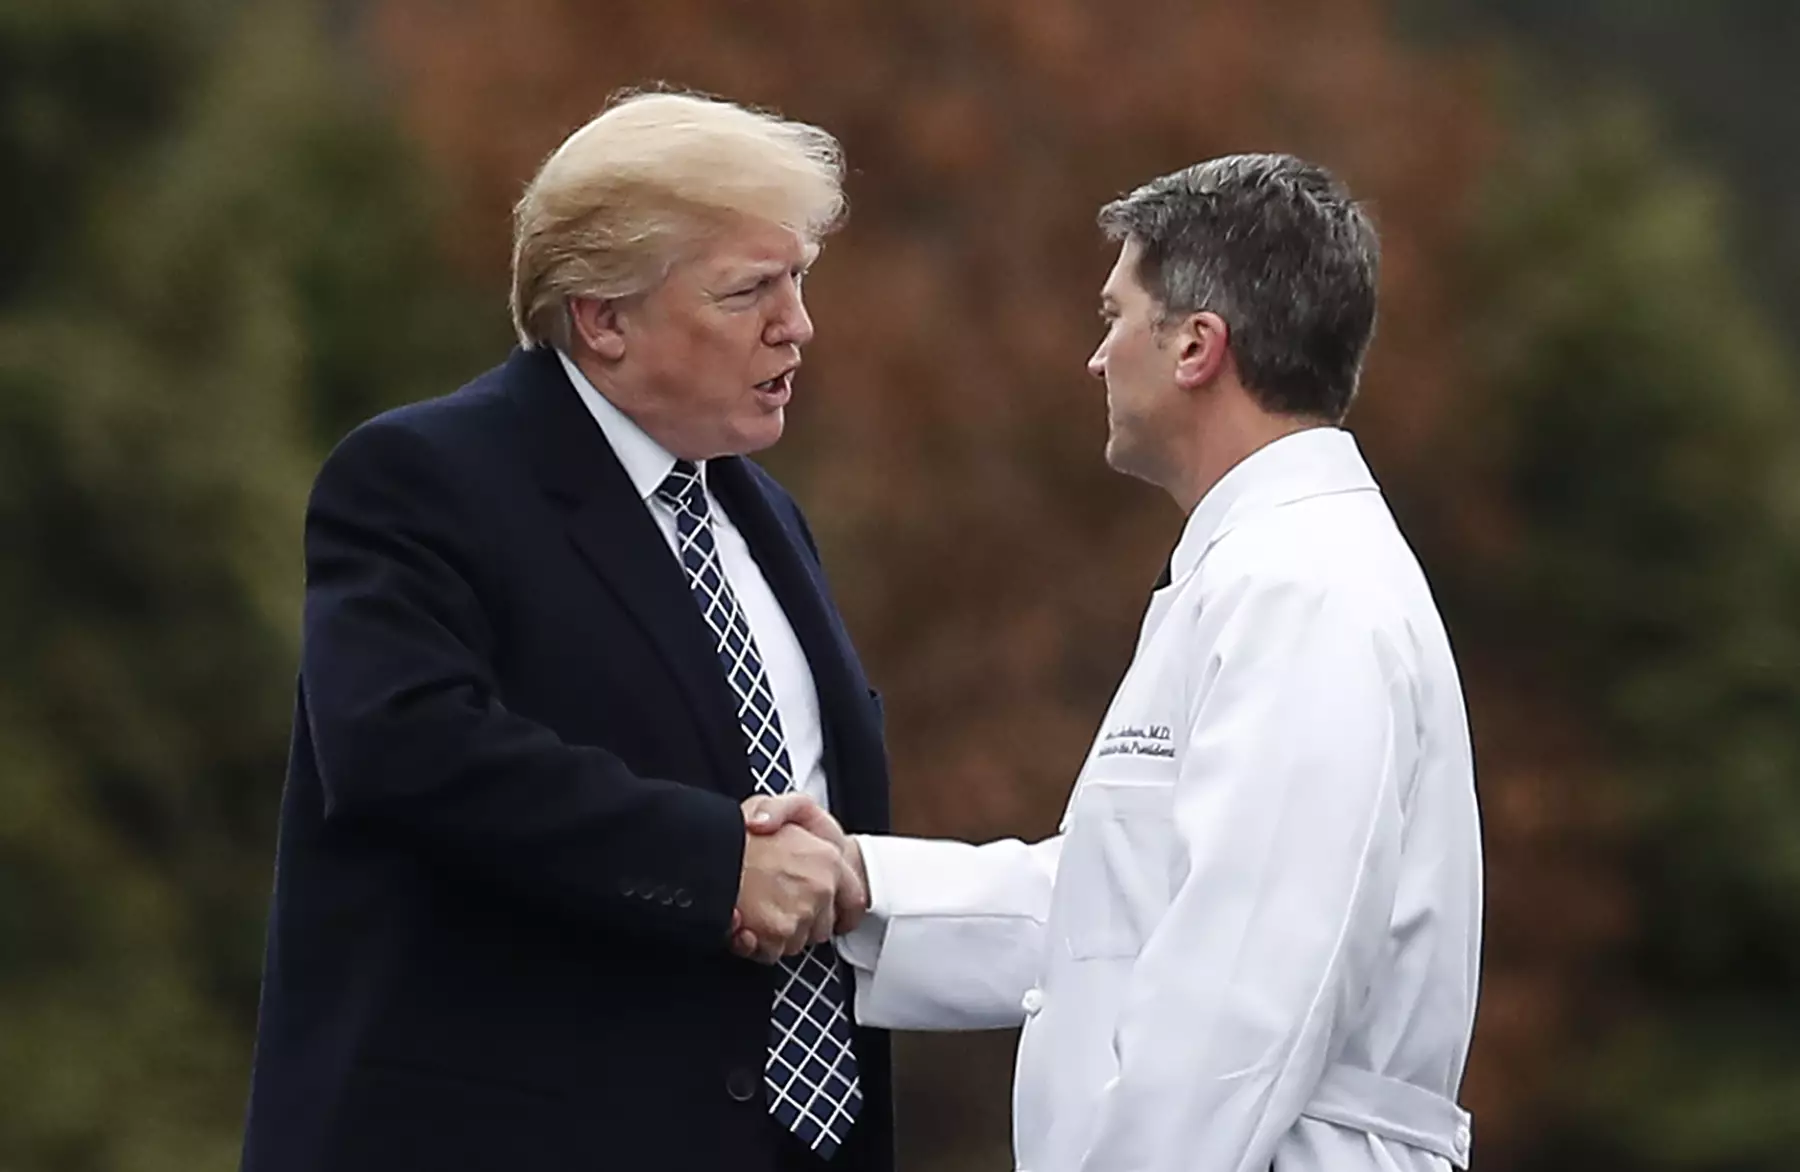 Trump meeting with Dr Ronny Jackson (